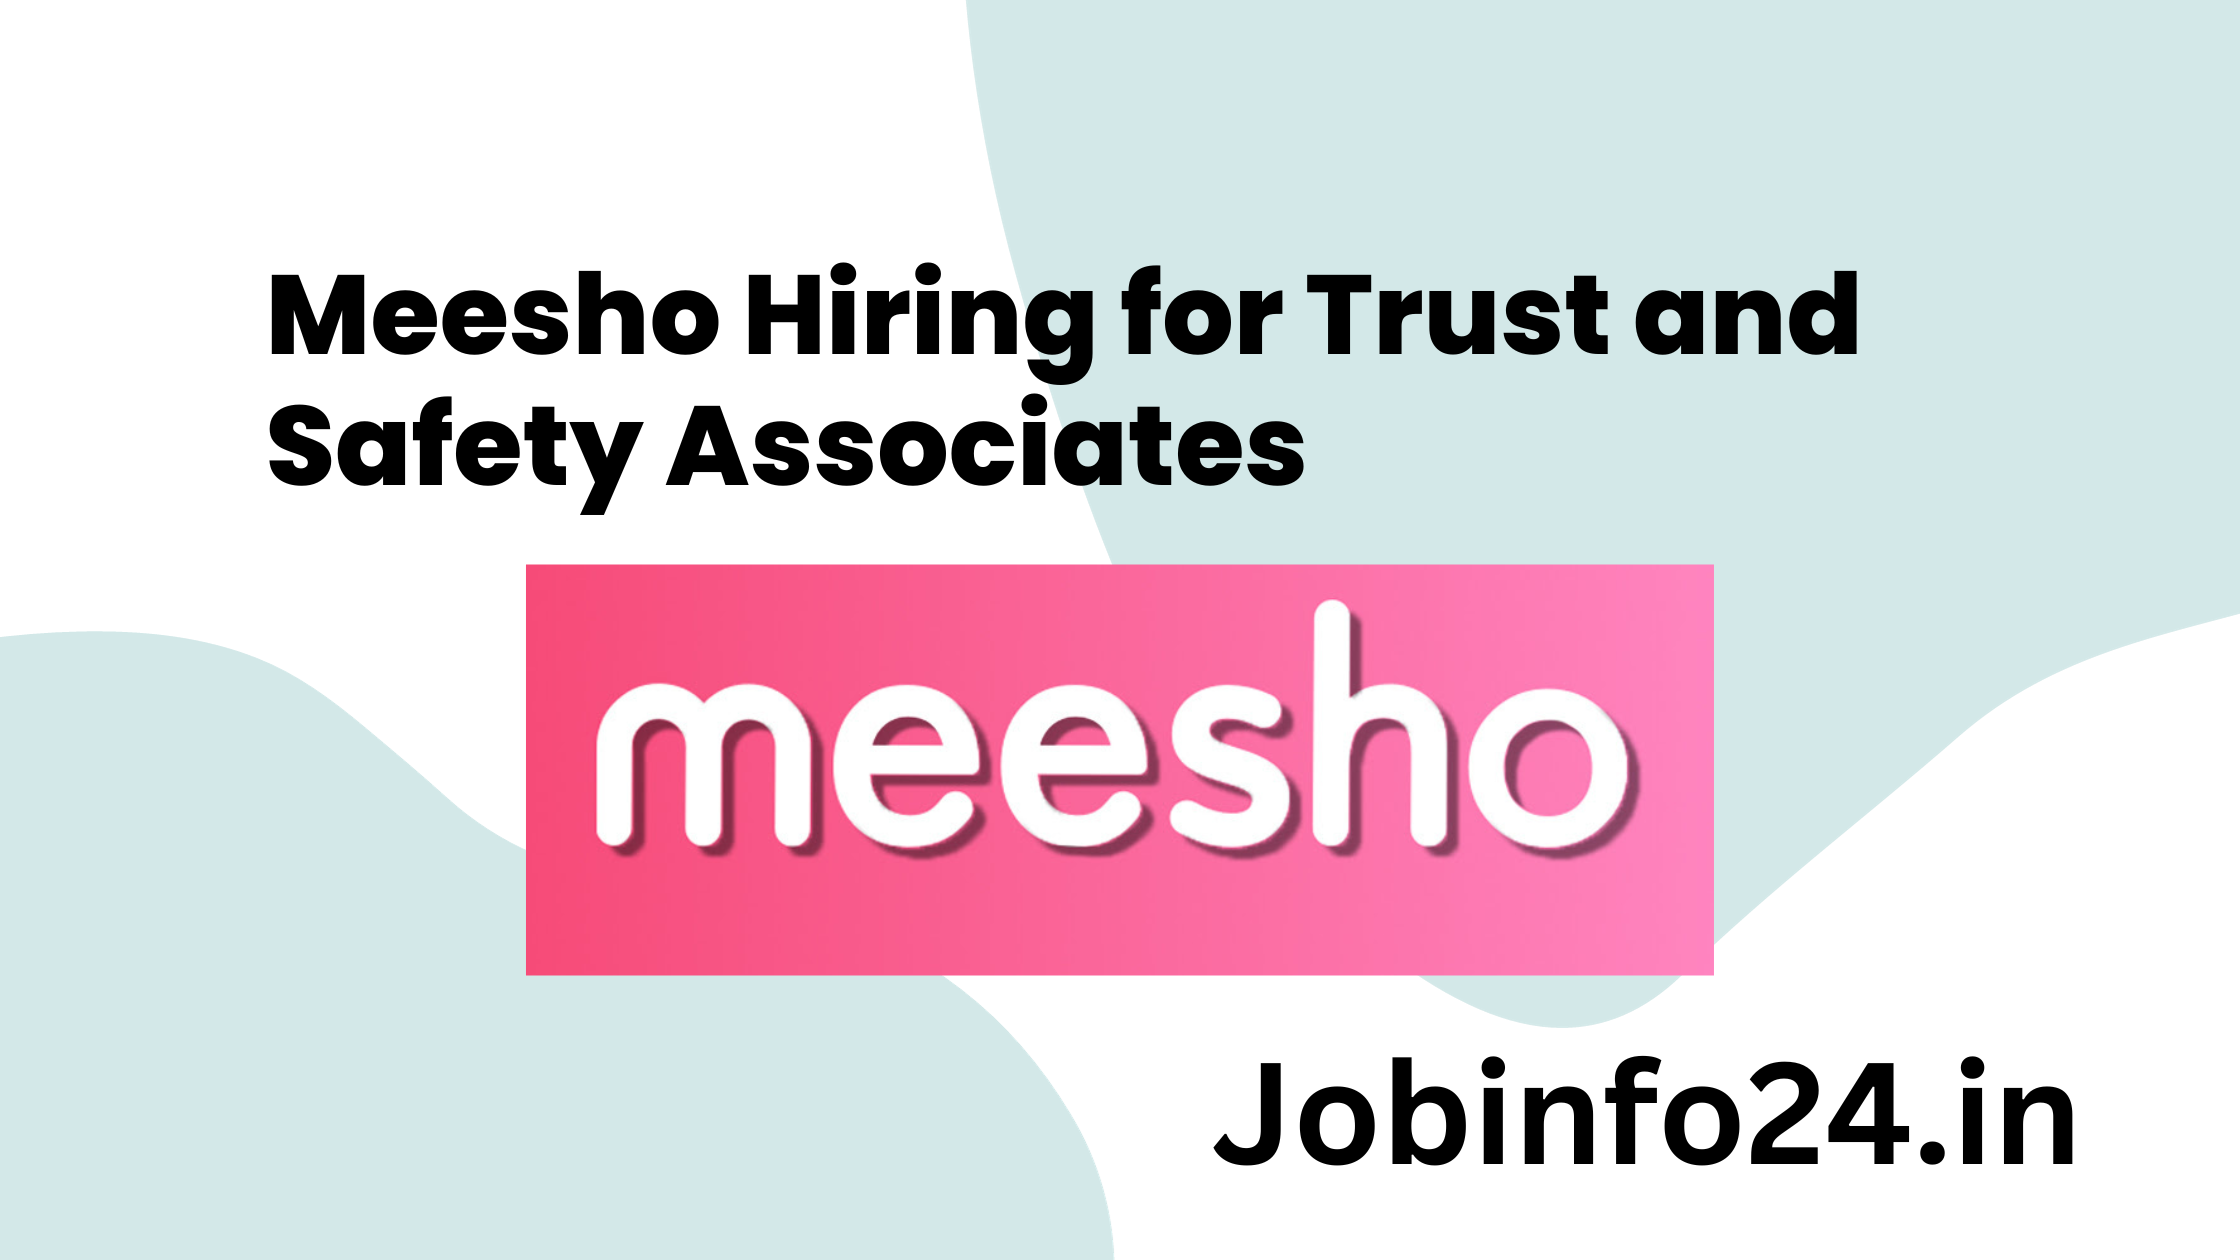 Meesho Hiring for Trust and Safety Associates